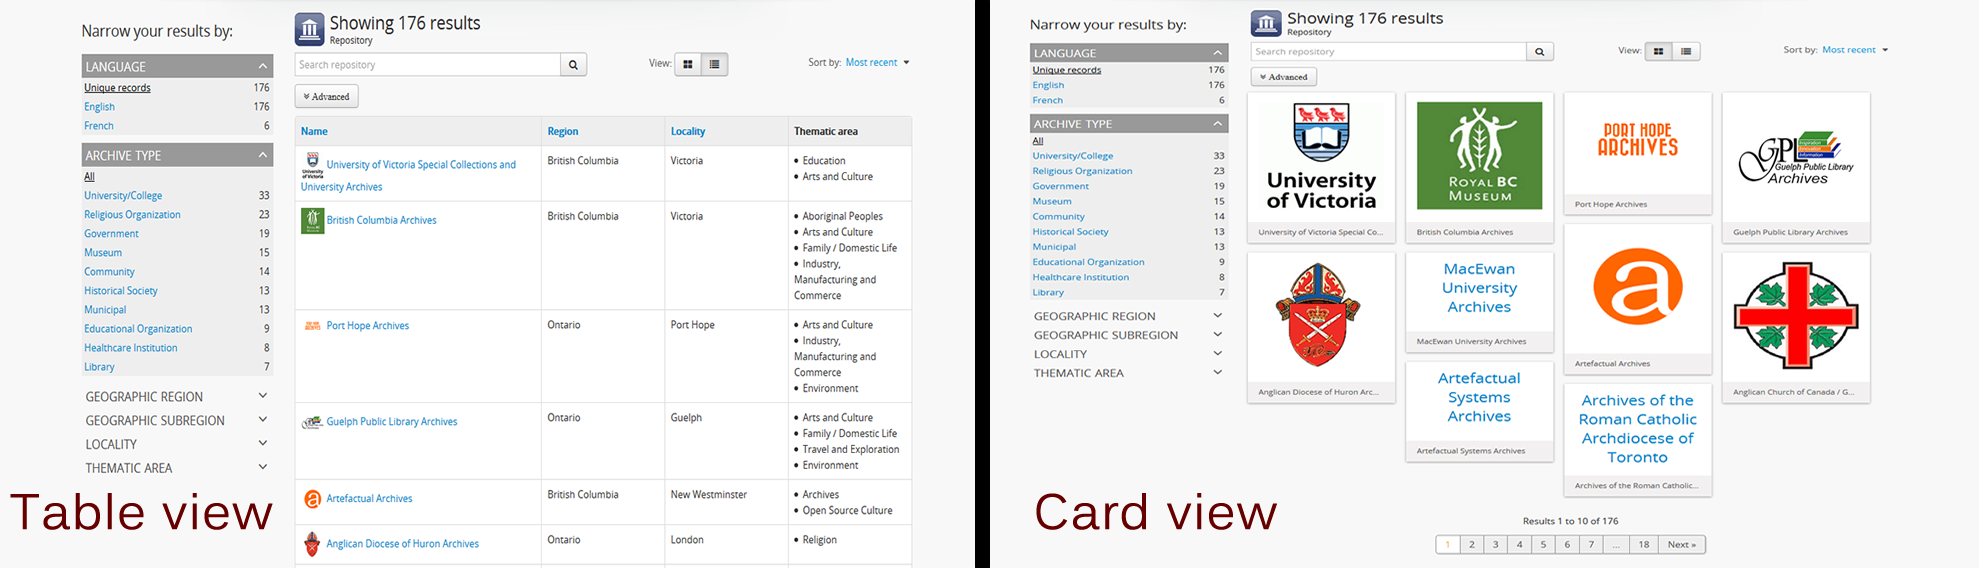 An comparison of the card and table views of the repository browse page